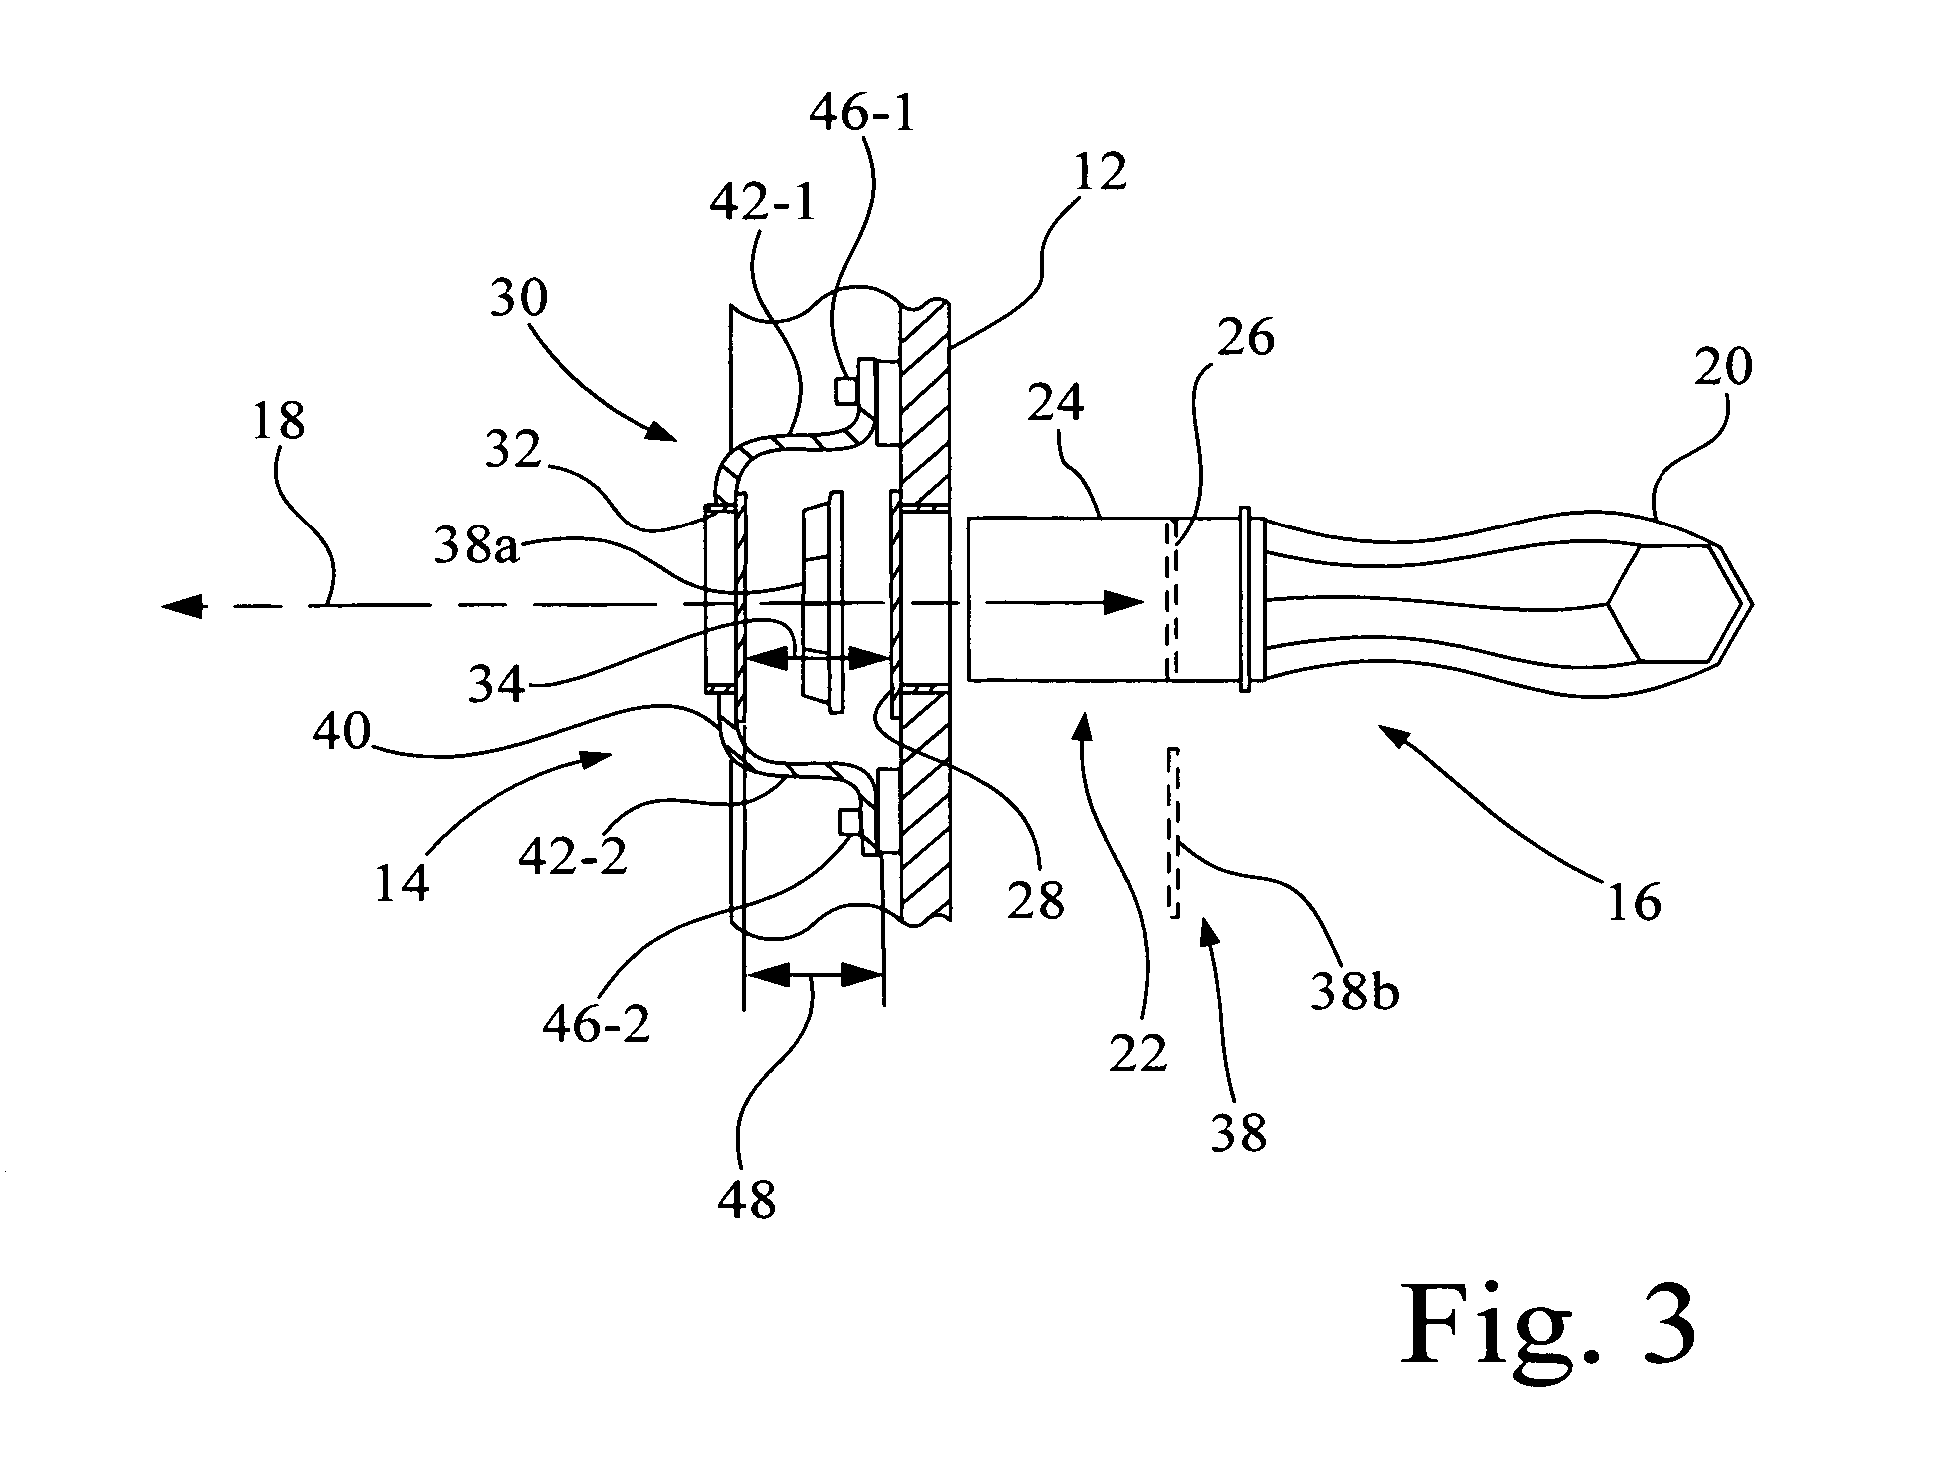 Door handle assembly including auxiliary bearing and auxiliary bearing support for a door handle